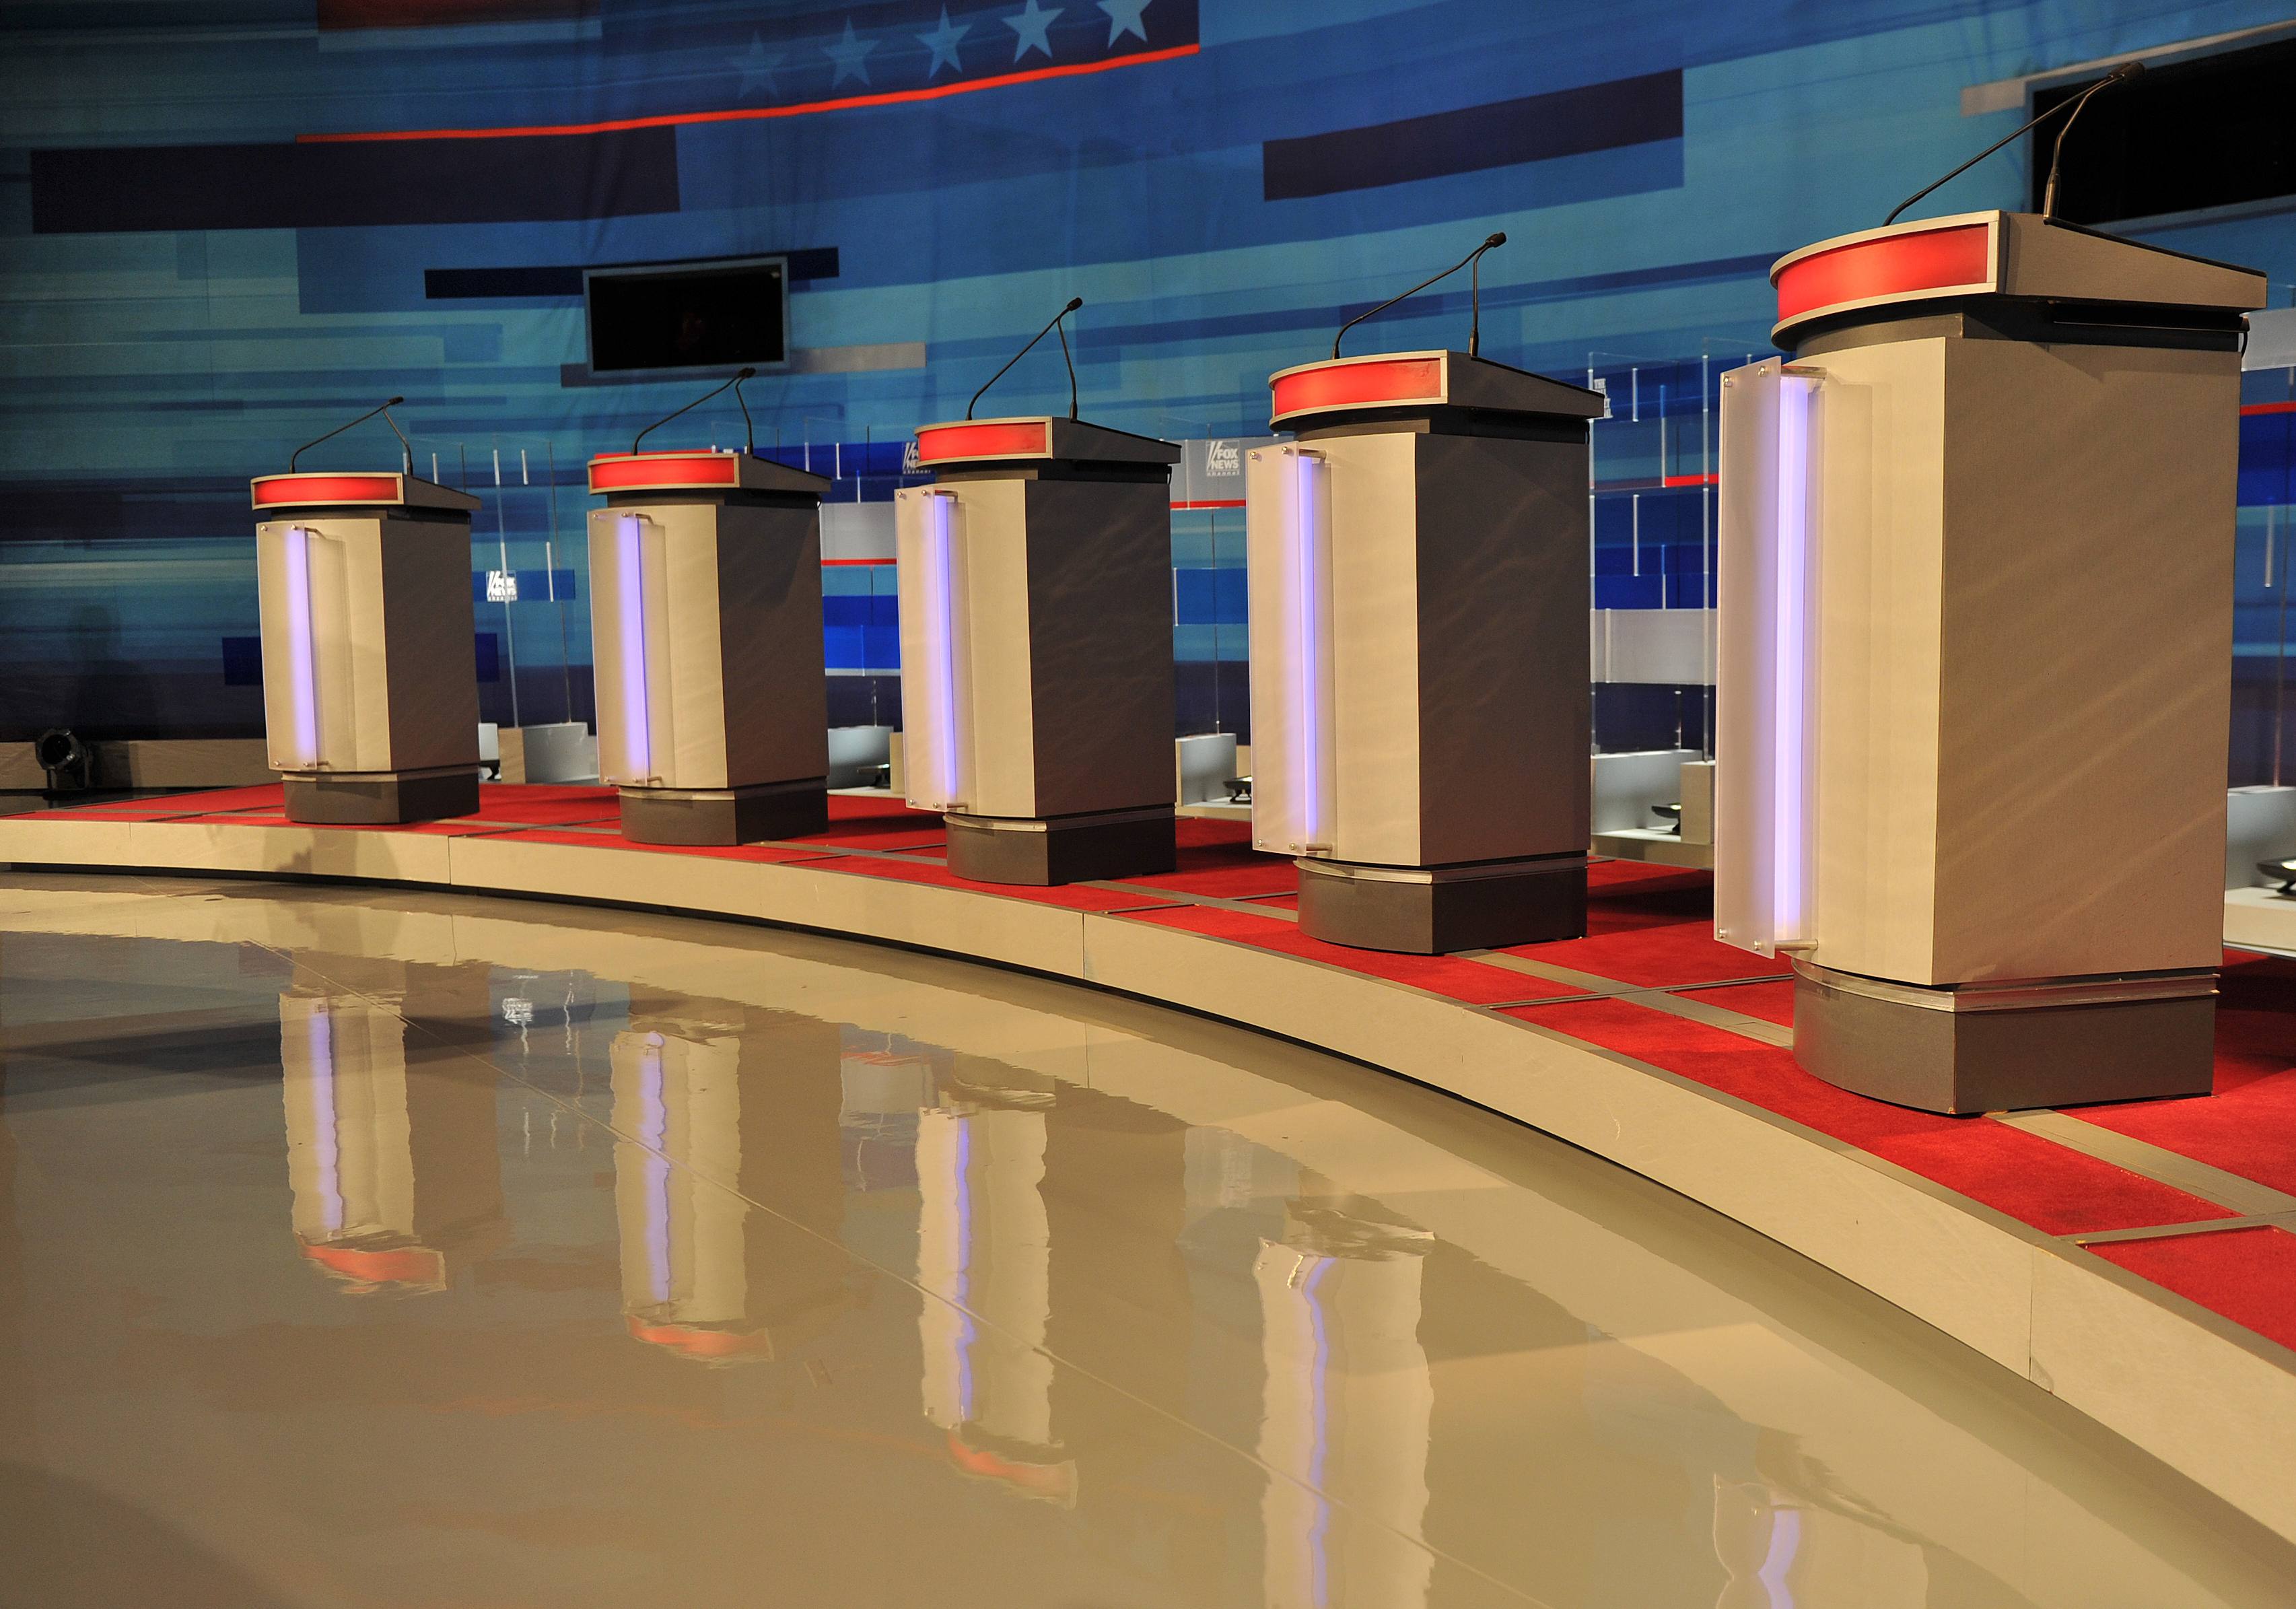 Seven Candidates Qualify For December Democratic Debate - Election Central3411 x 2390